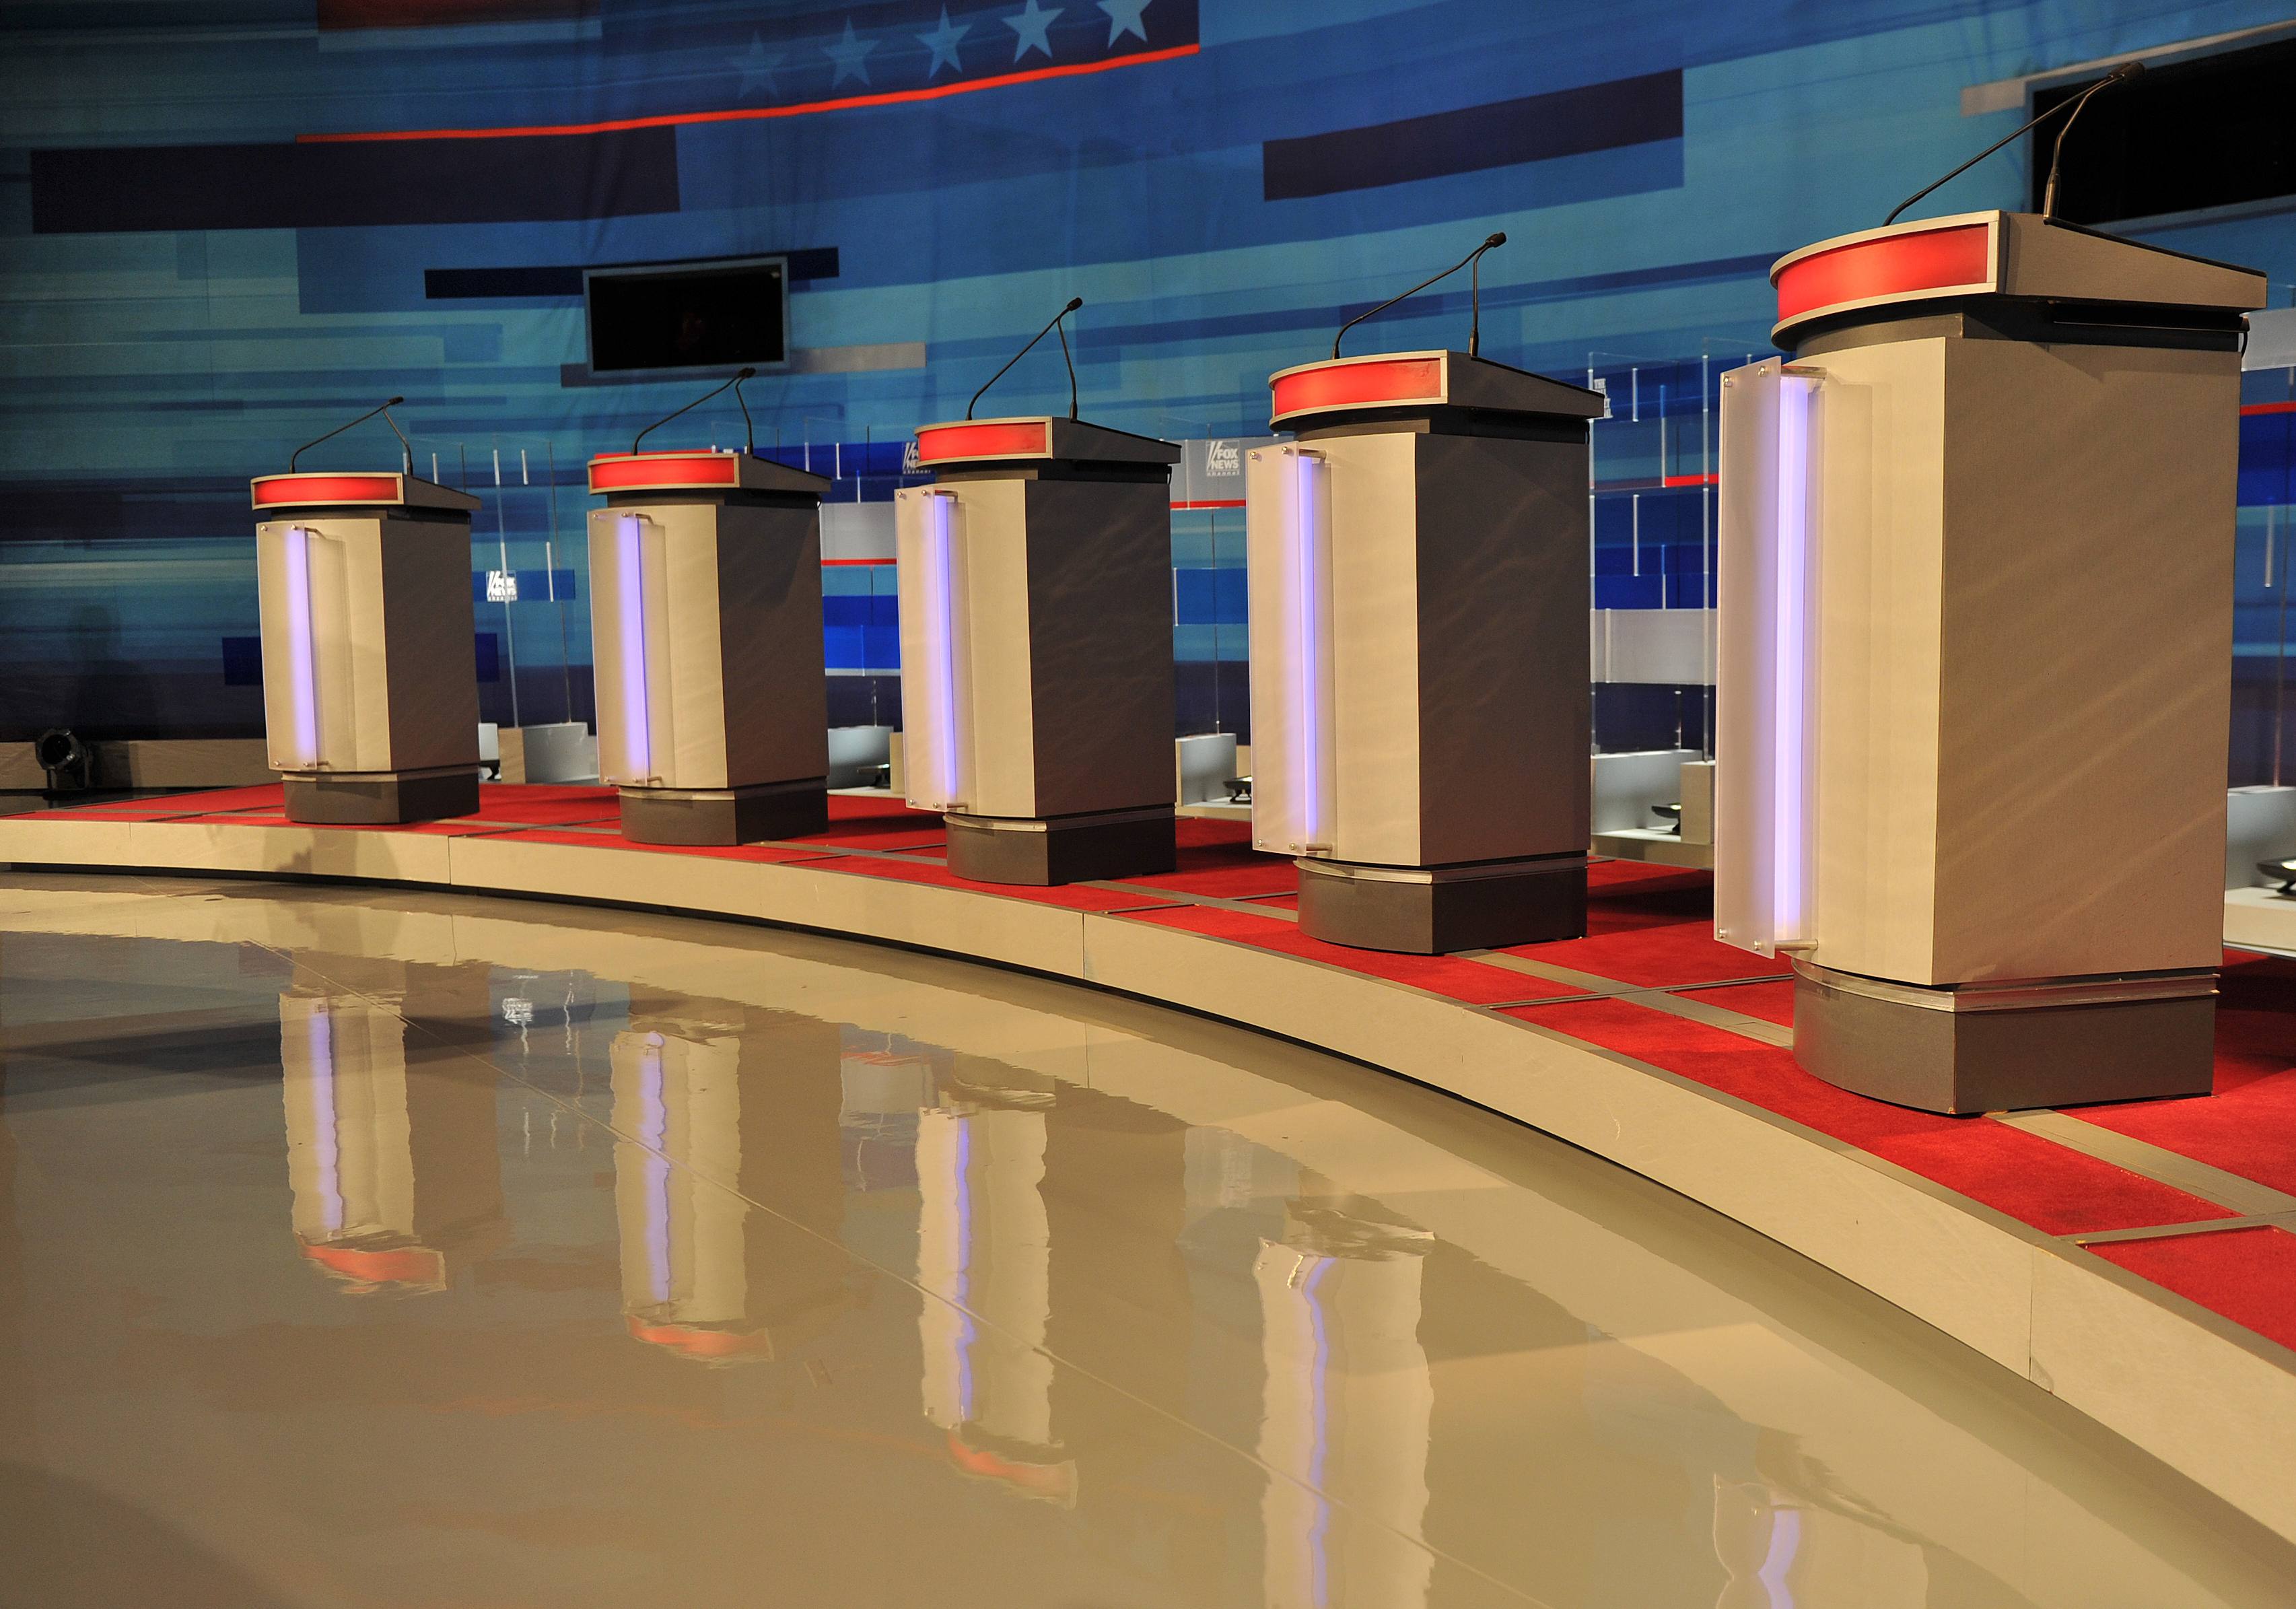 Seven Candidates Qualify For December Democratic Debate - Election Central3411 x 2390